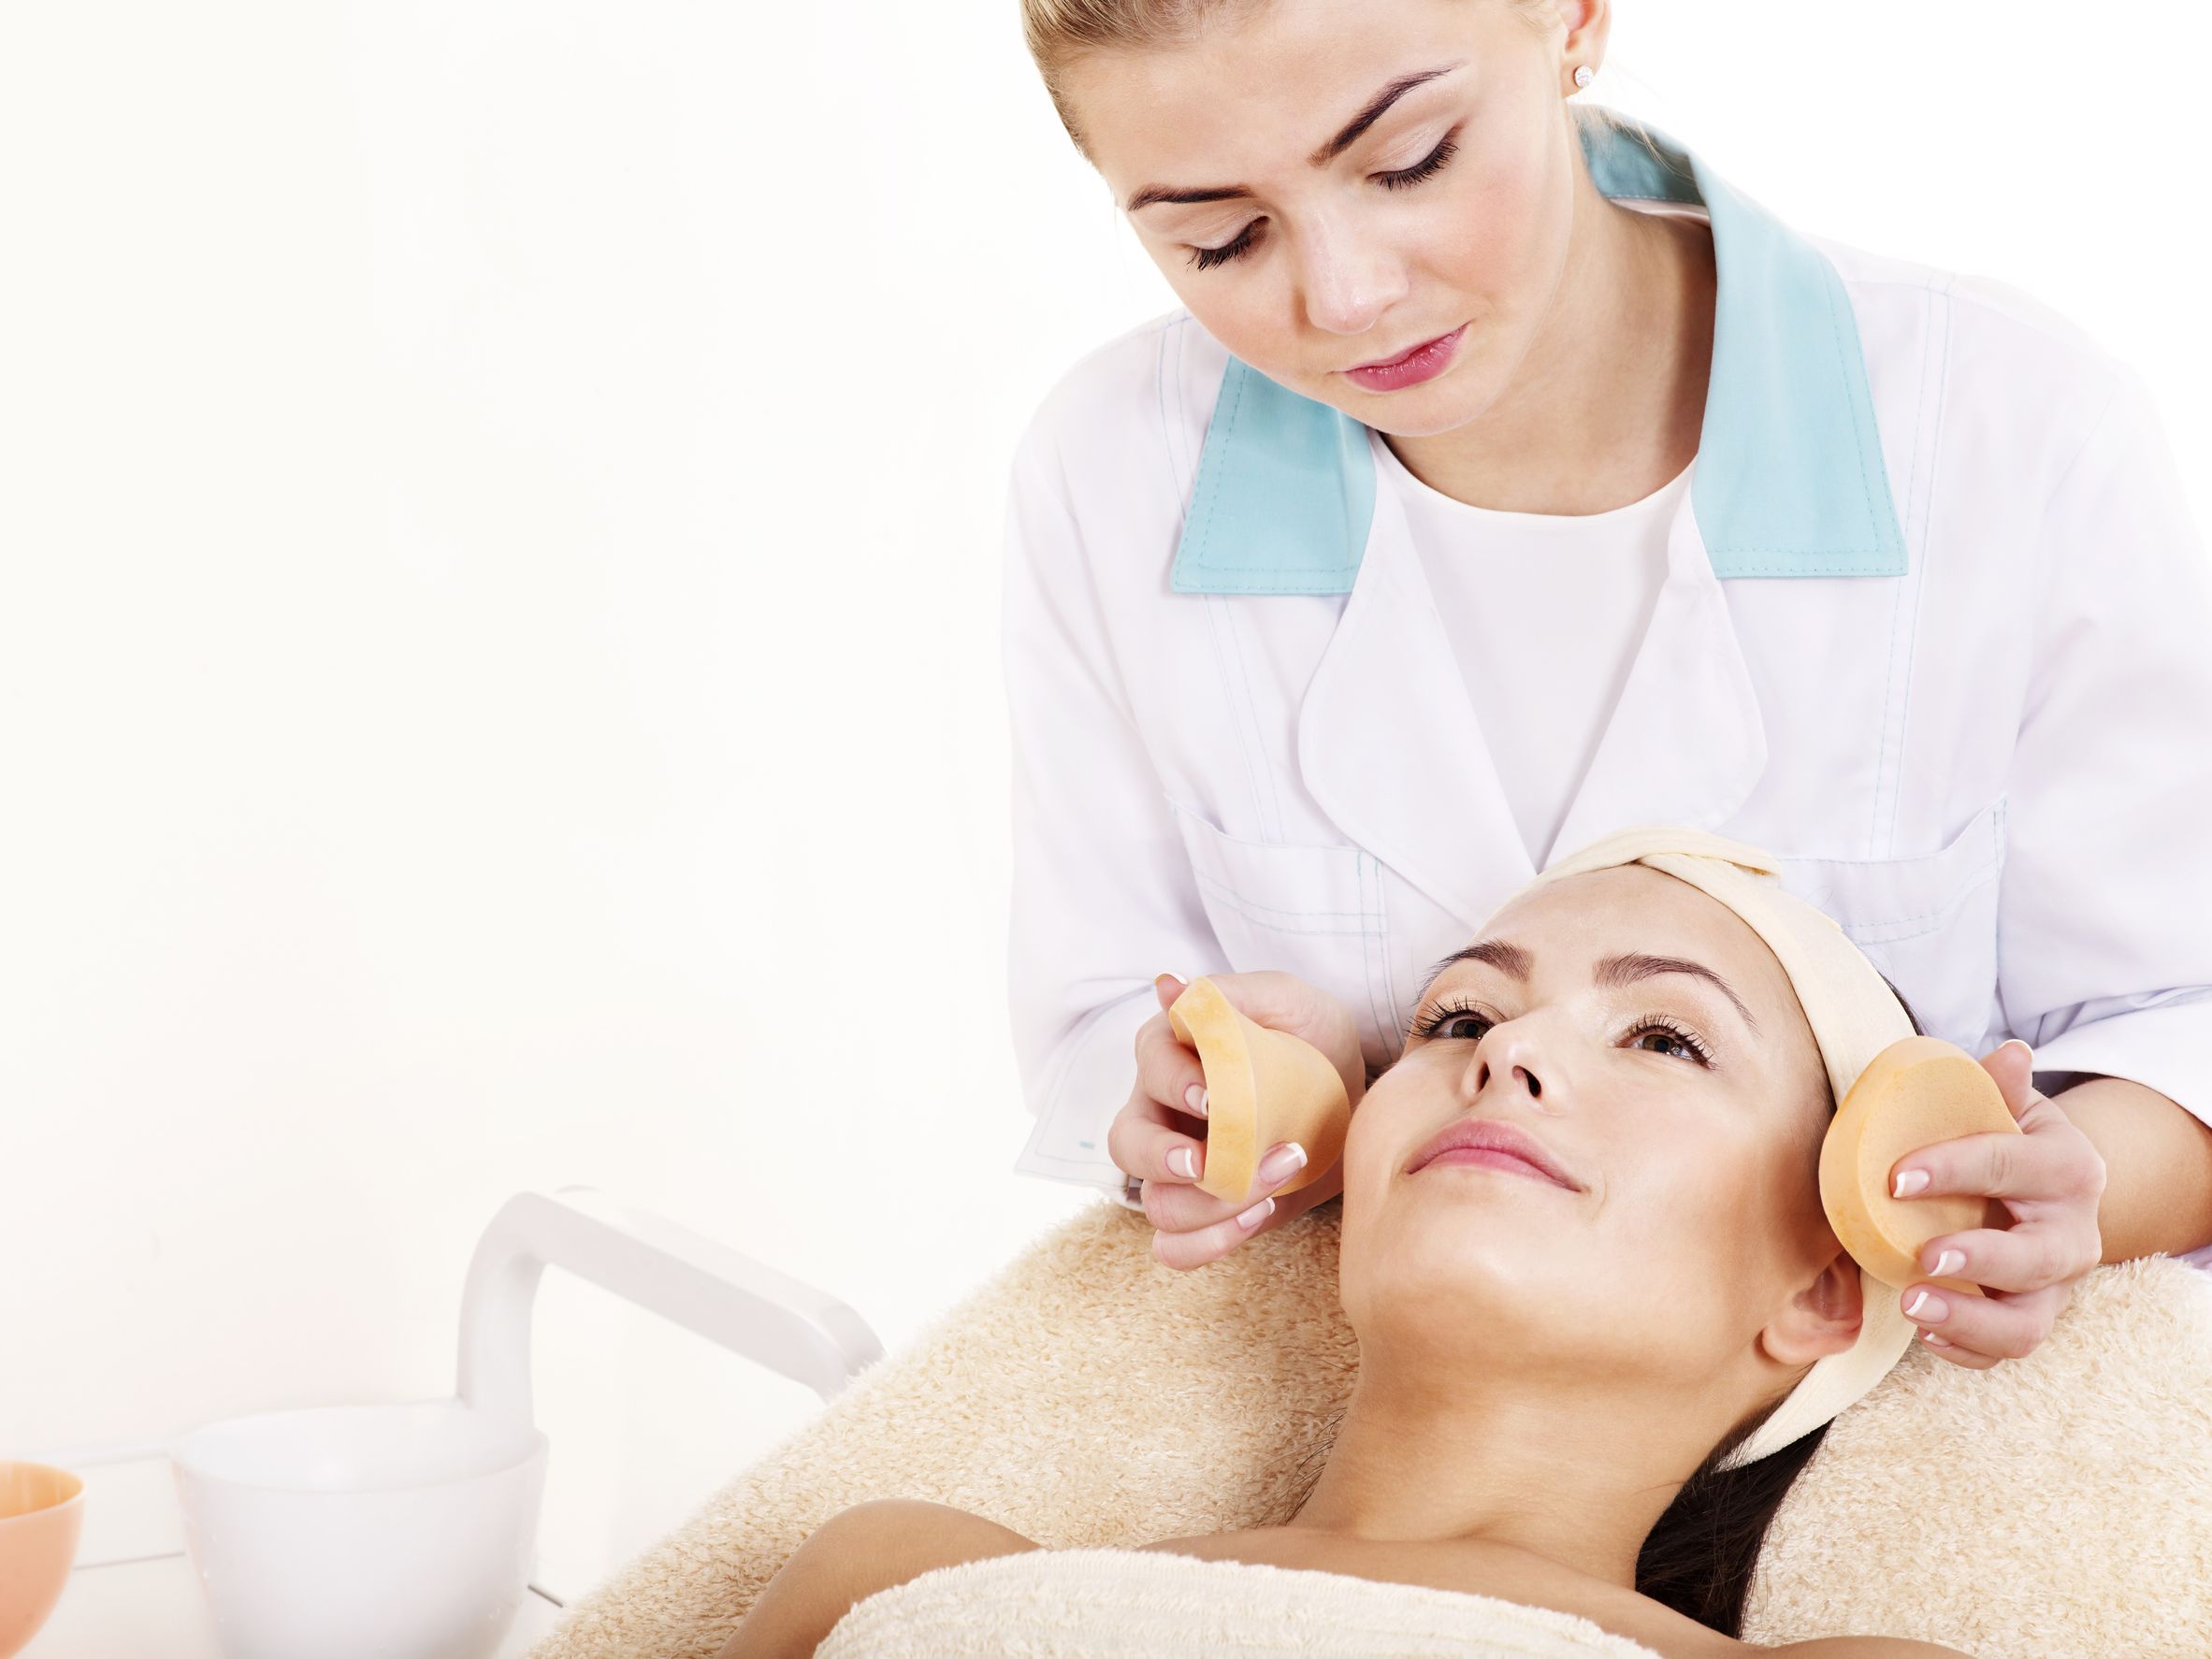 Visit a Luxurious and Professional Salon for a Full Day of Pampering